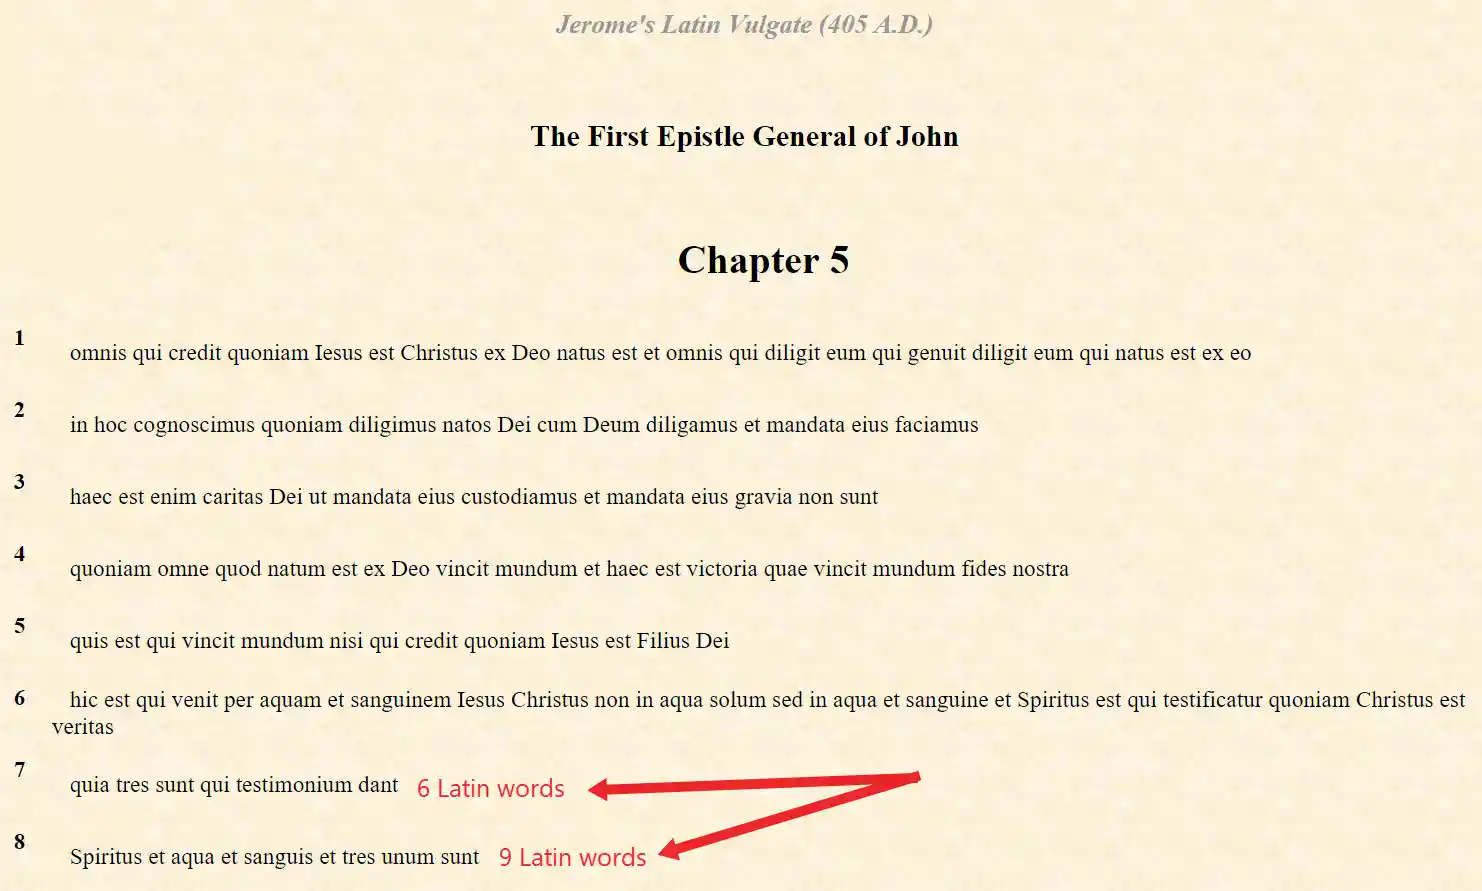 screenshot of St. Jerome's Latin Vulgate text from 390AD - 405A.D.